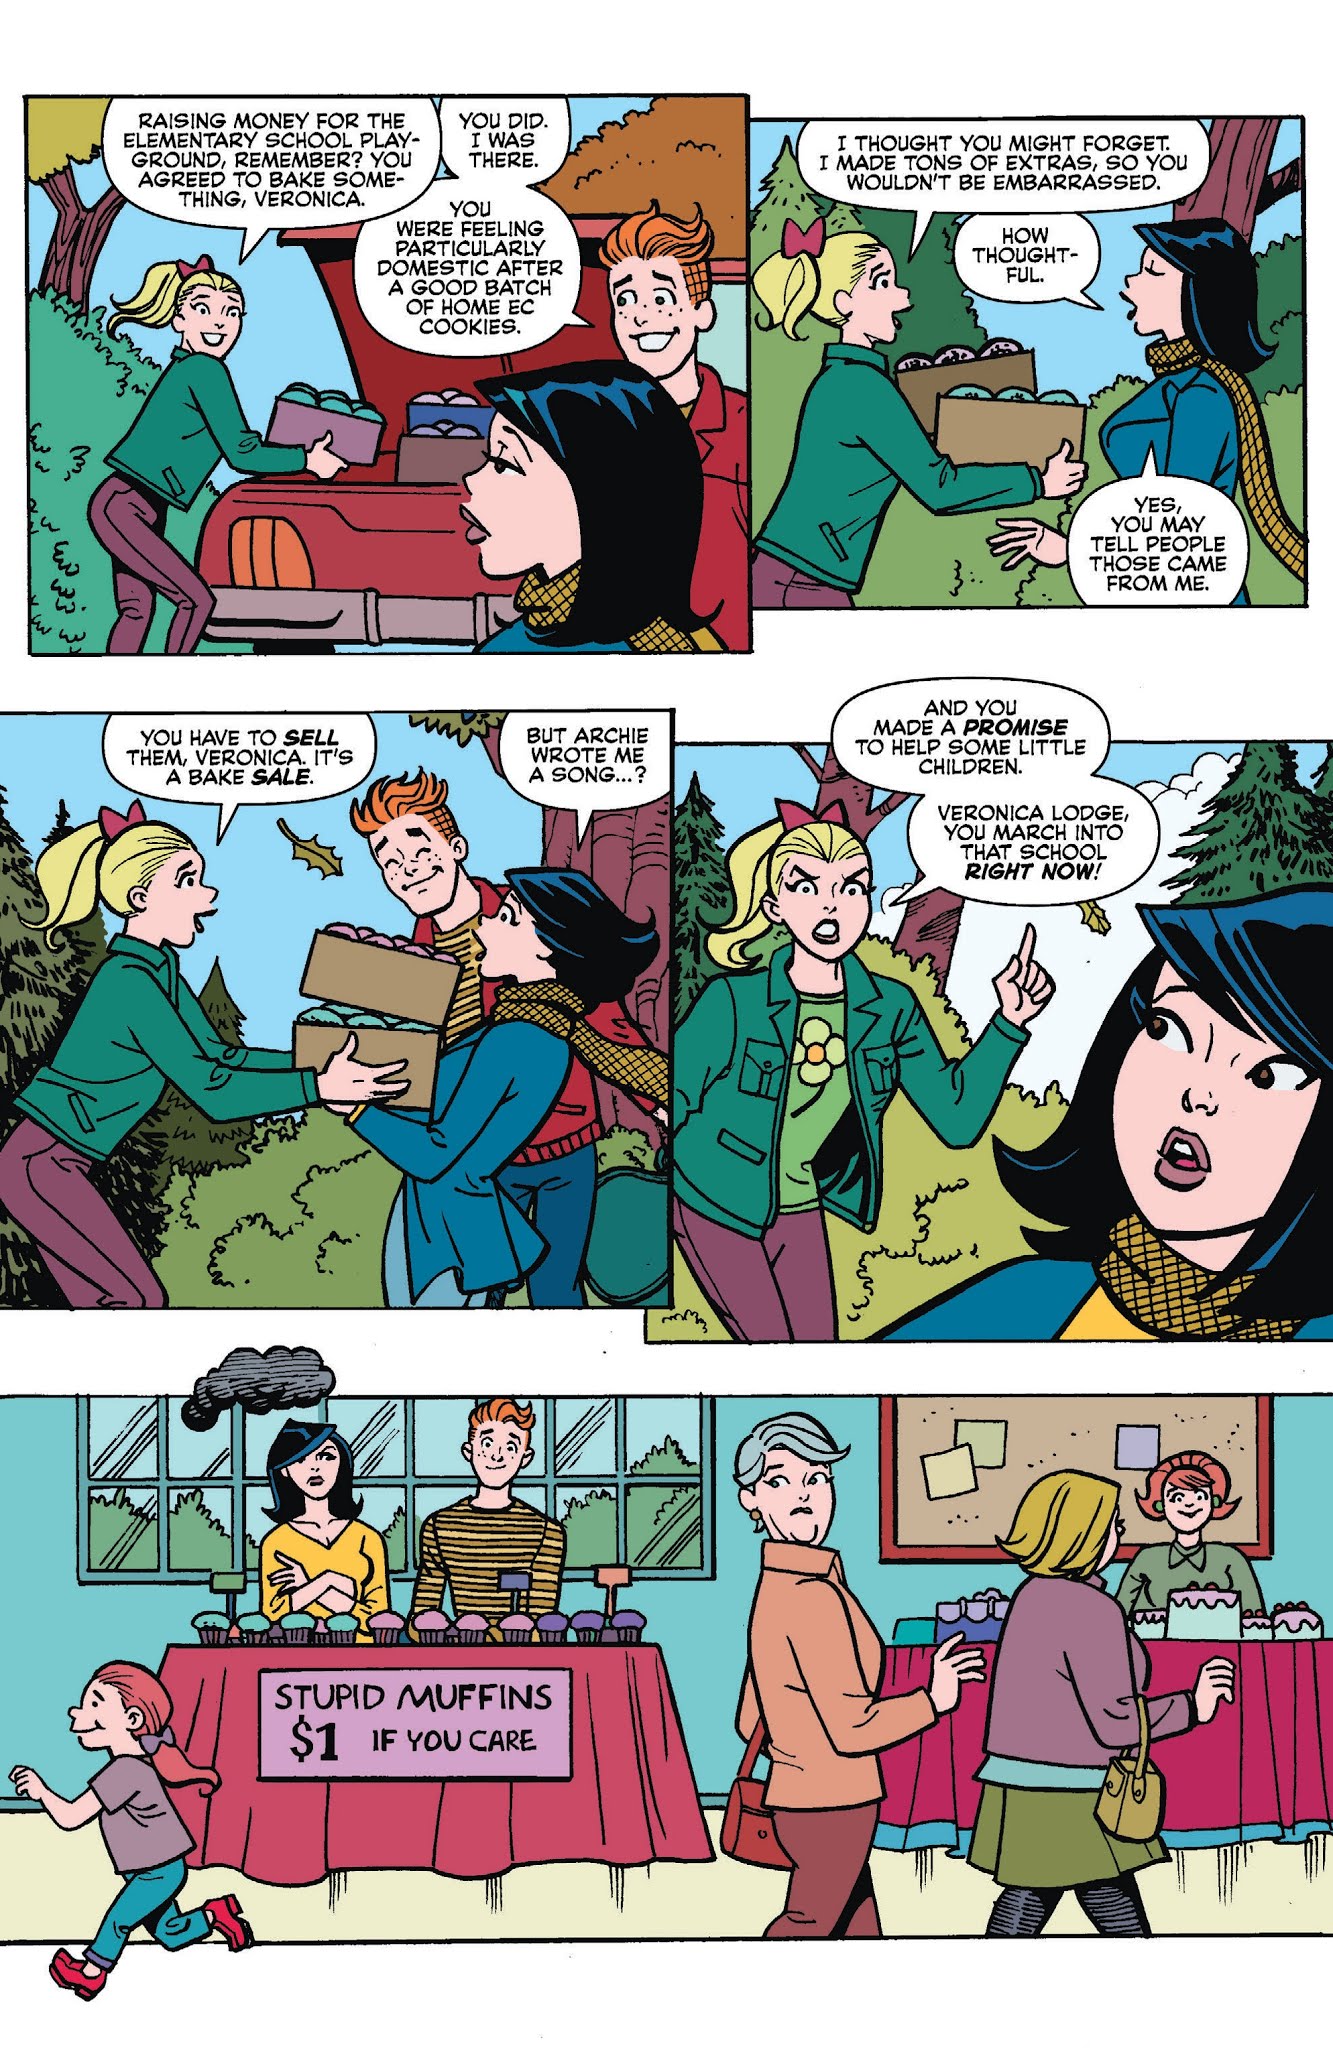 Read online Your Pal Archie comic -  Issue #4 - 19